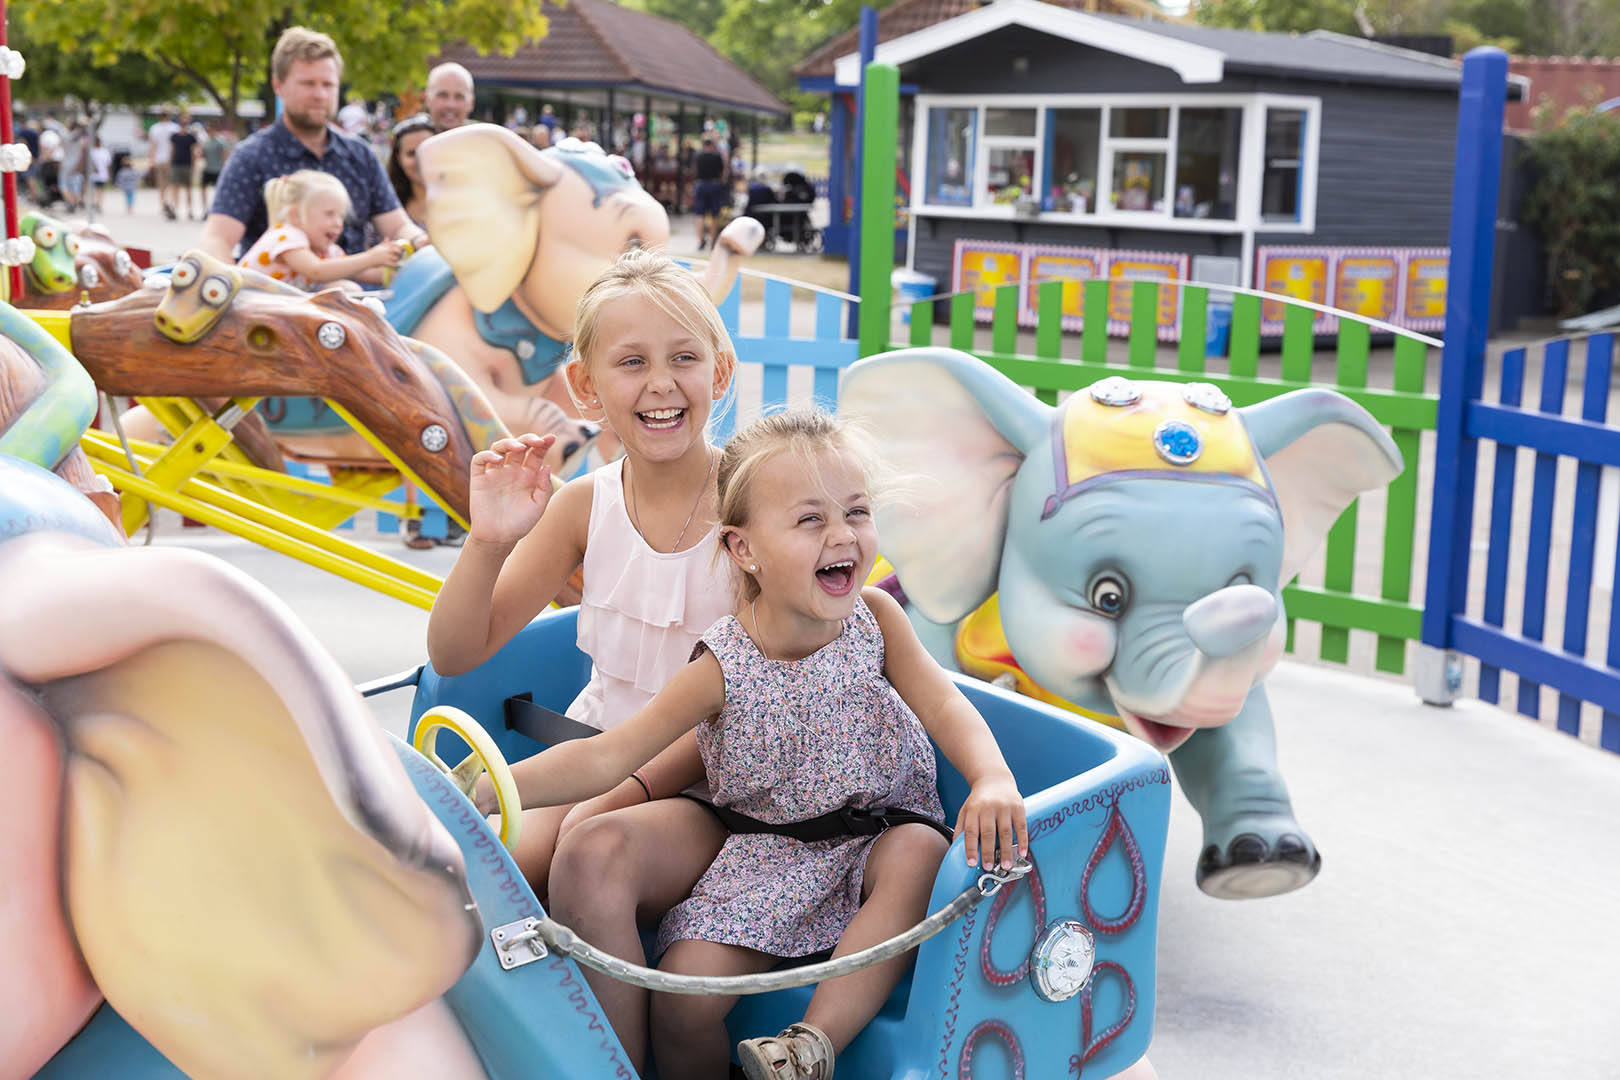 Sommerland Sjælland, Elephant rollercoaster, Summer fun for the family, Scan Magazine